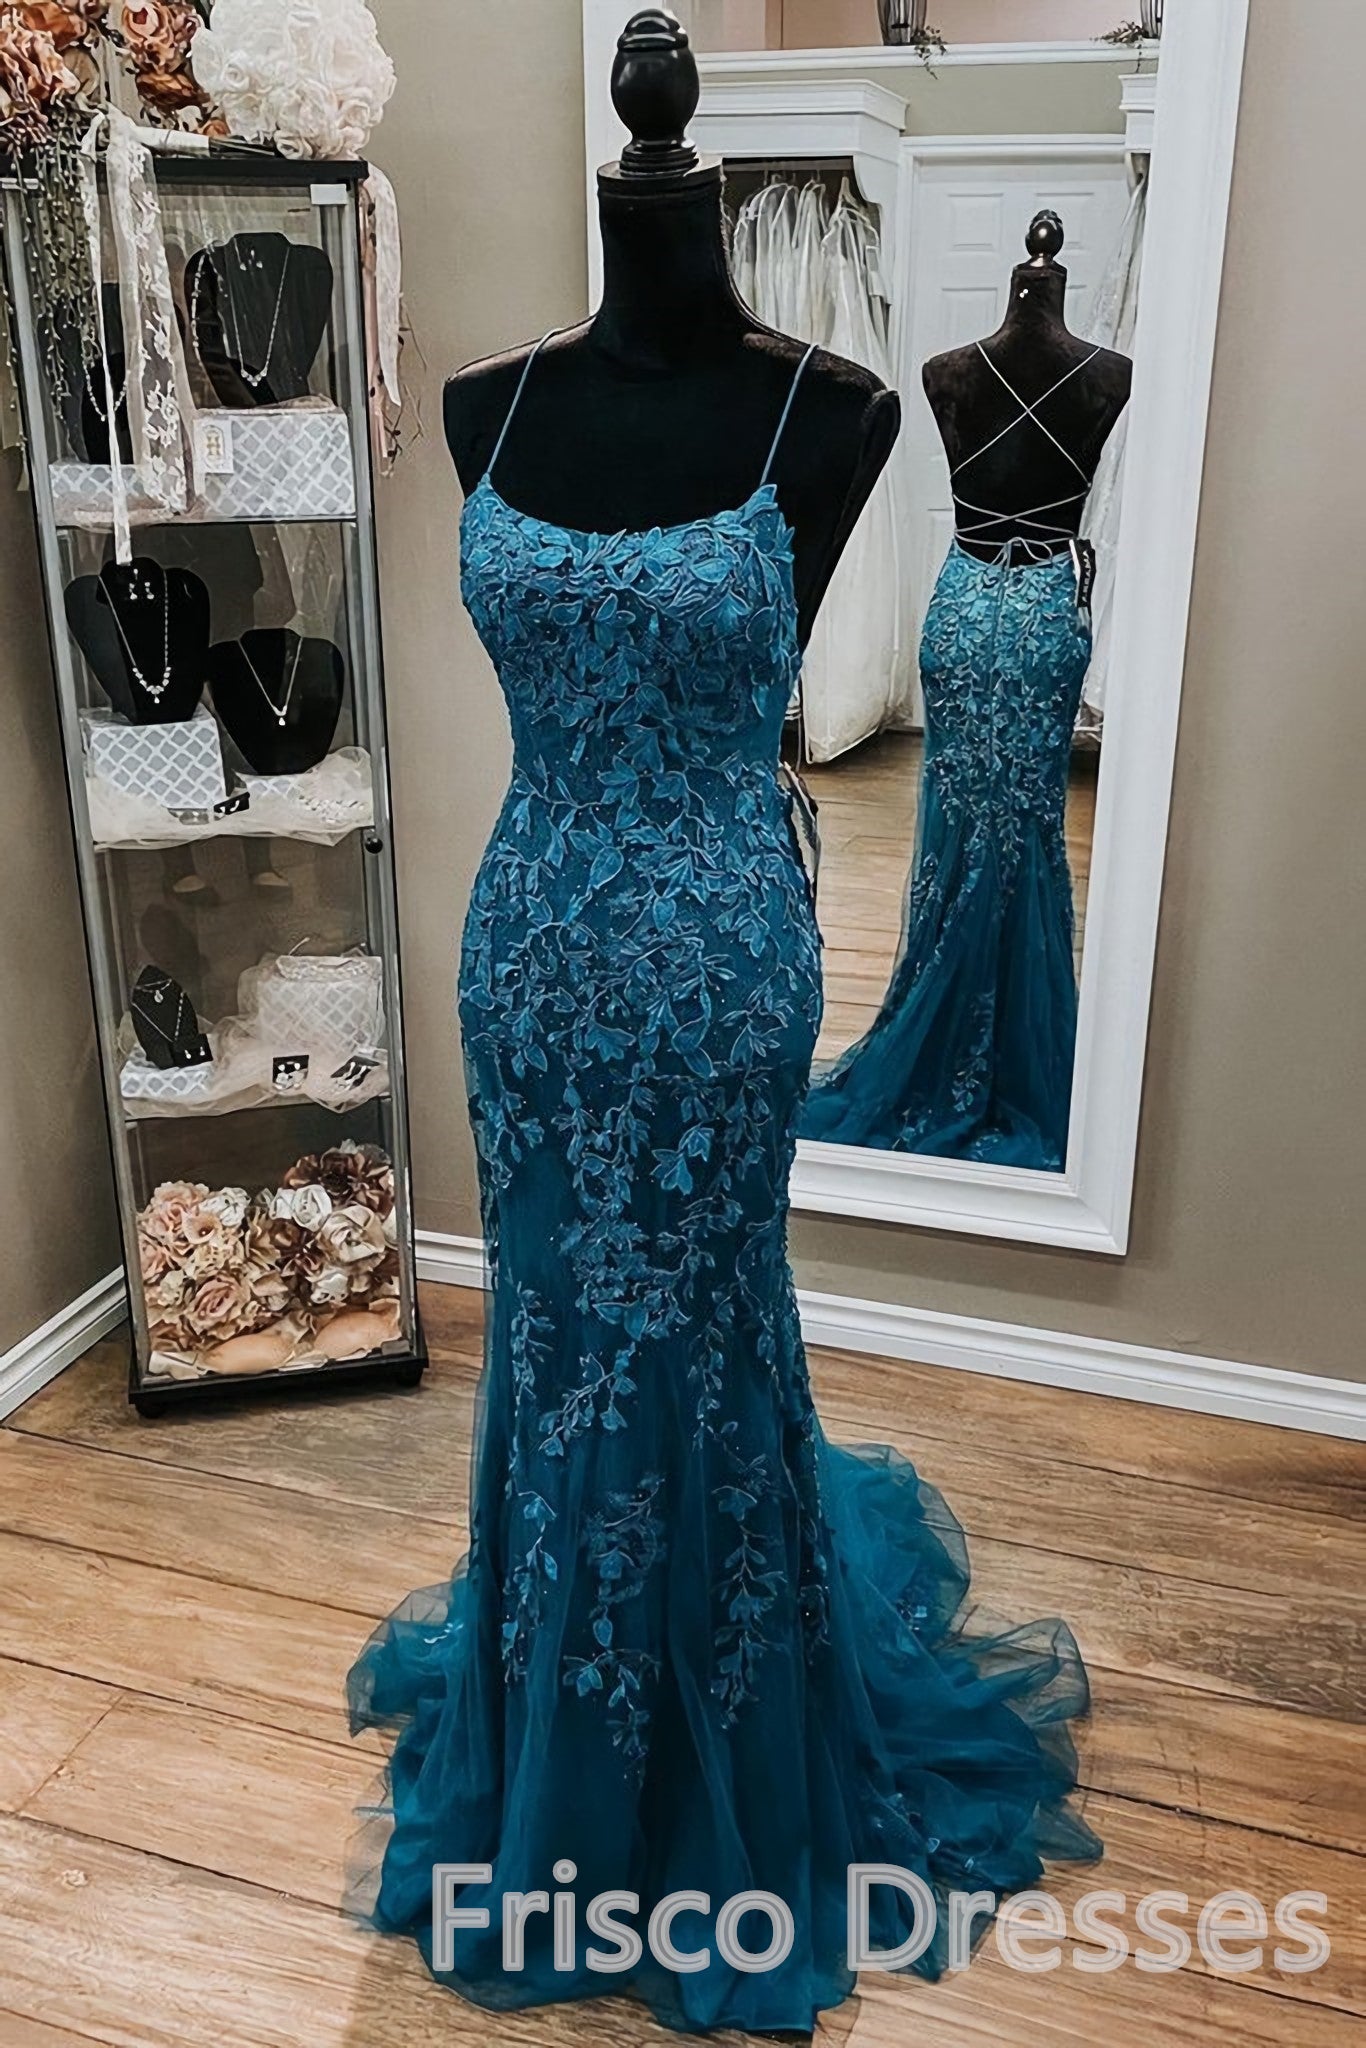 Party Dress Shop Near Me, Mermaid Teal Lace Backless Mermaid Dark Teal Lace Long Prom Dresses Long Formal Evening Dresses